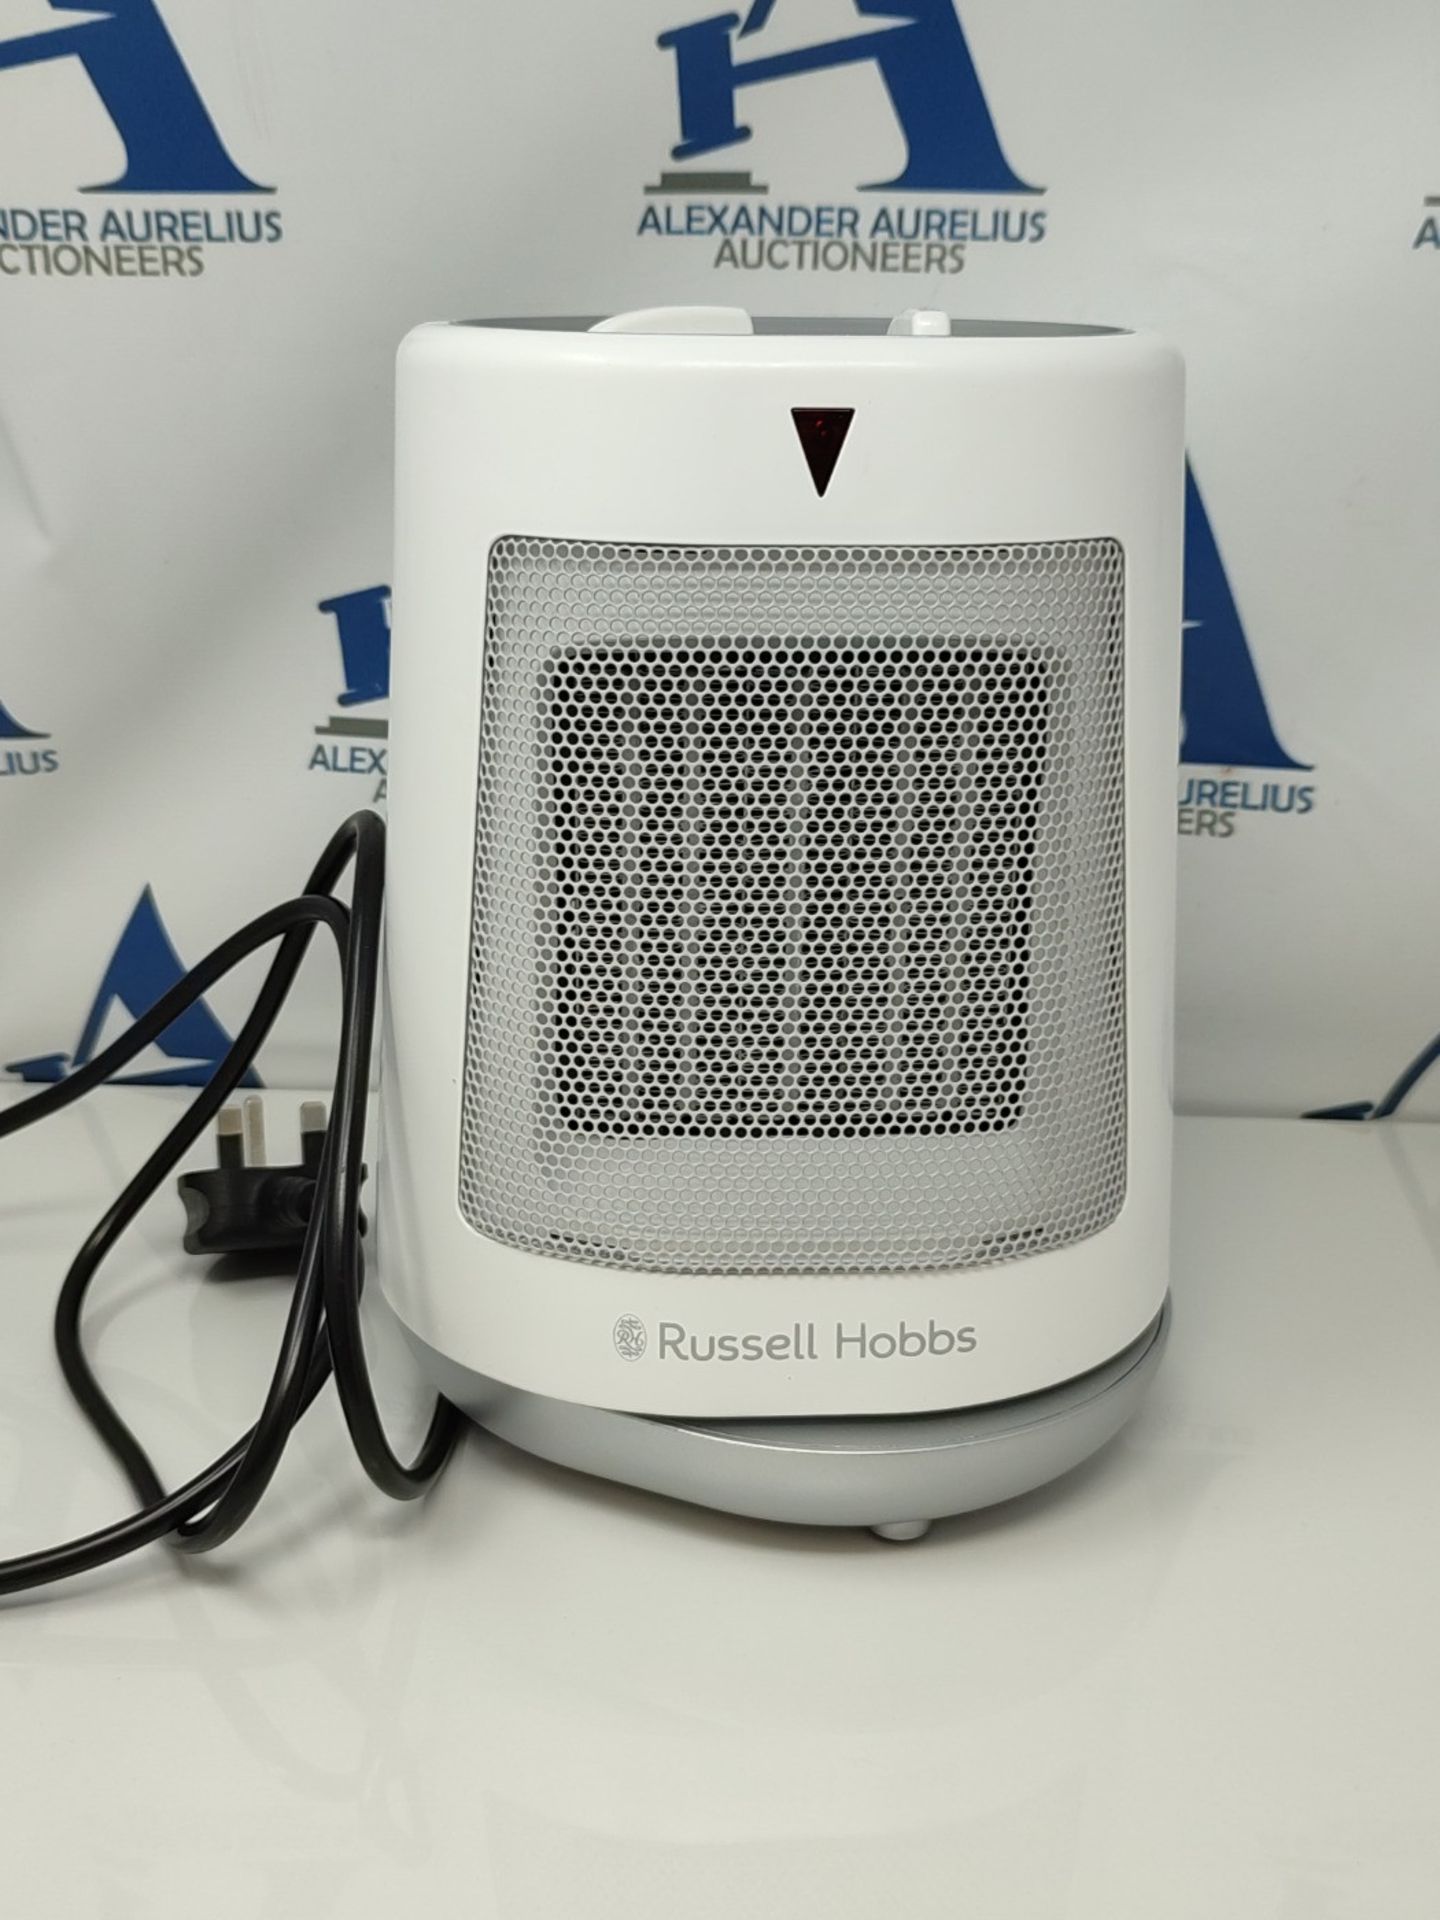 Russell Hobbs 2000W/2KW Electric Heater in White PTC Ceramic Heater, Portable Oscillat - Image 3 of 3